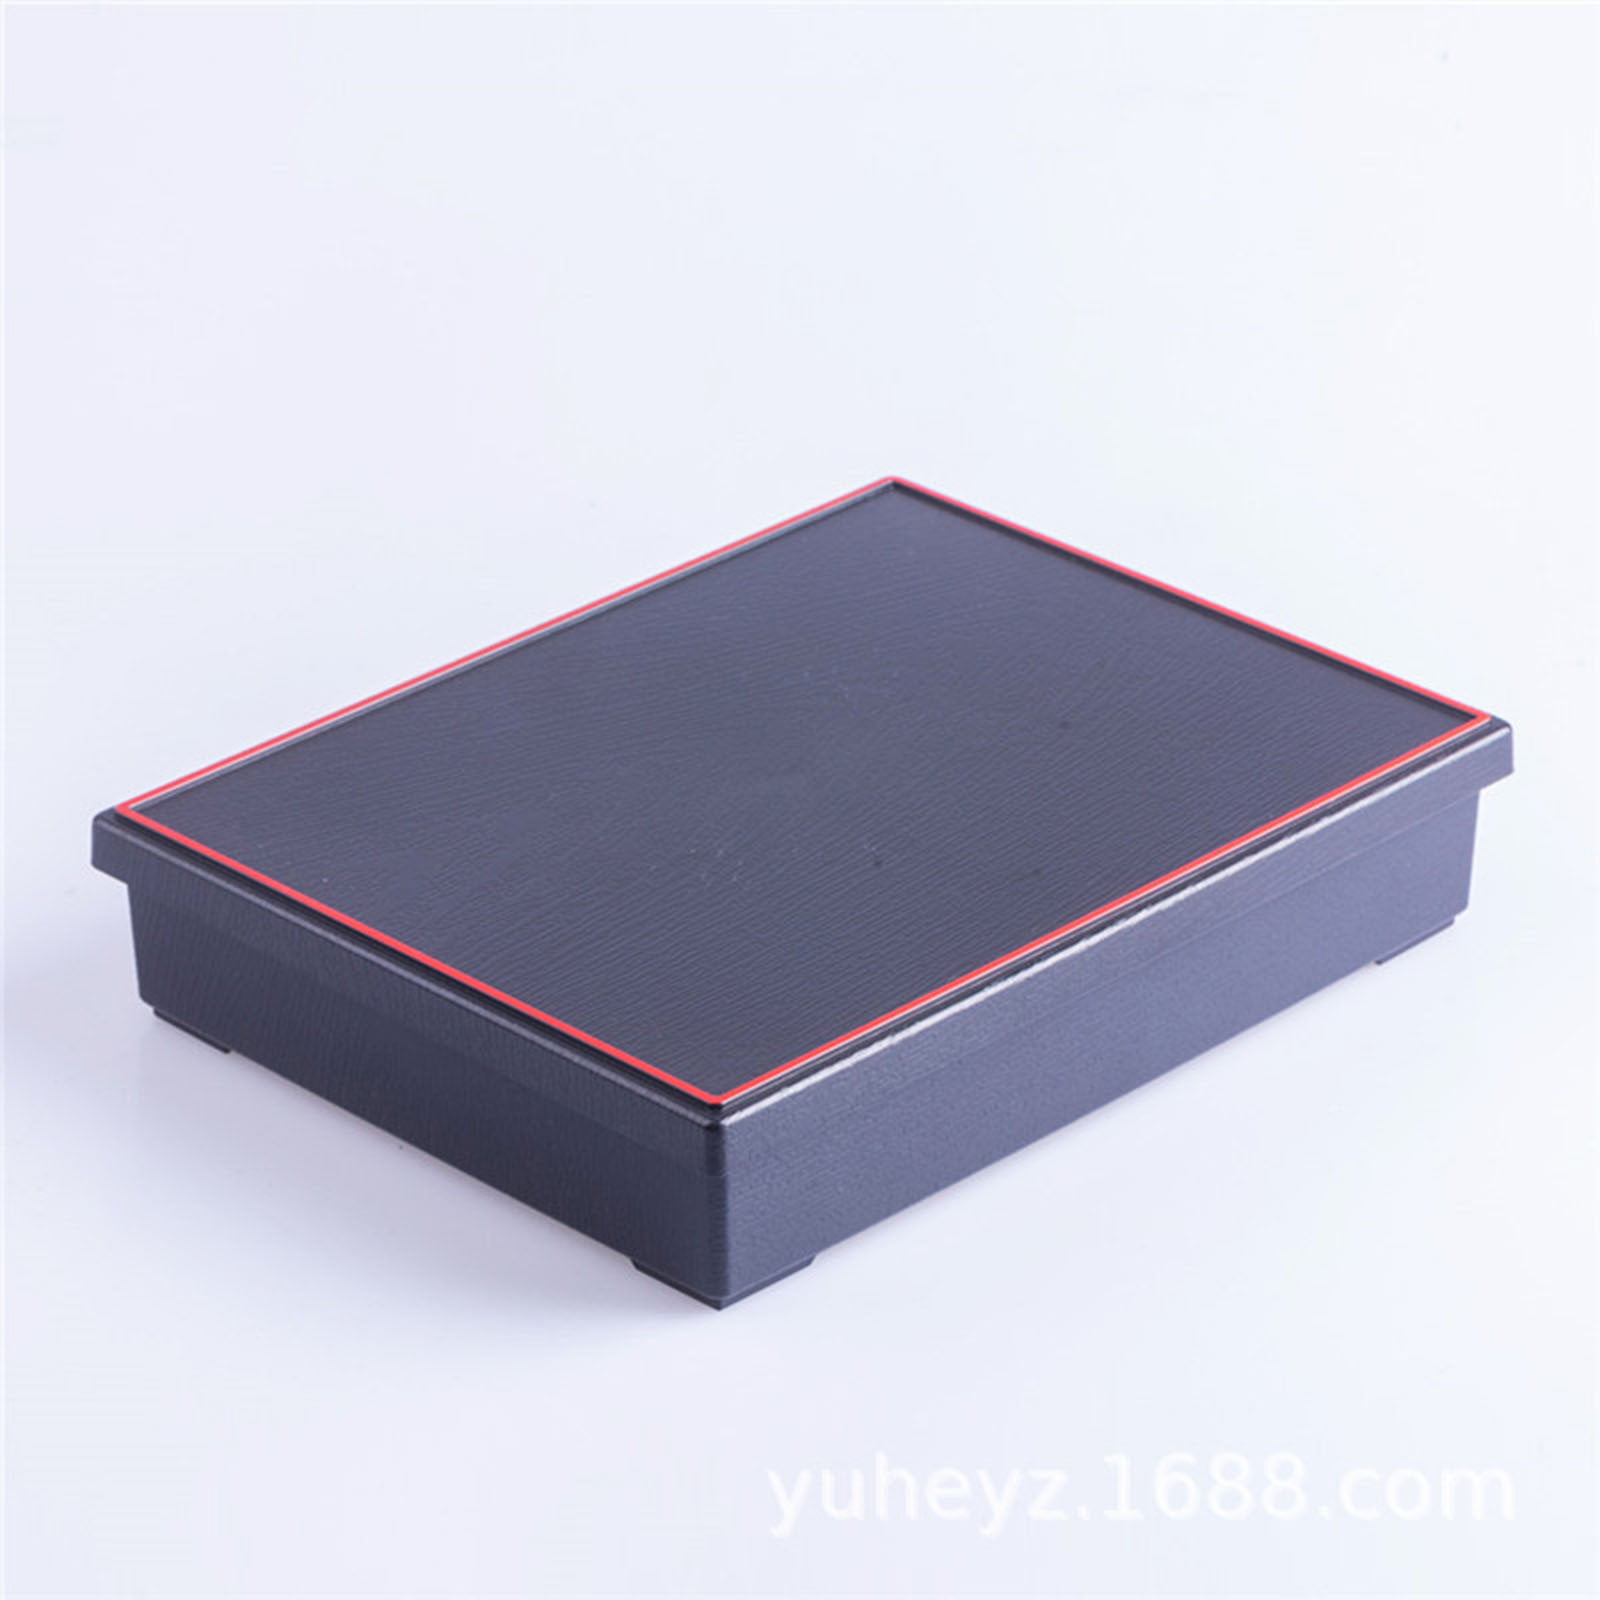  Happy Sales HSLQ-BTX9SQ, Japanese Sushi Tray Lunch Box Bento box  Traditional Plastic Lacquered Box for Restaurant or Home Made in Japan,  Square Design Red and Black: Home & Kitchen